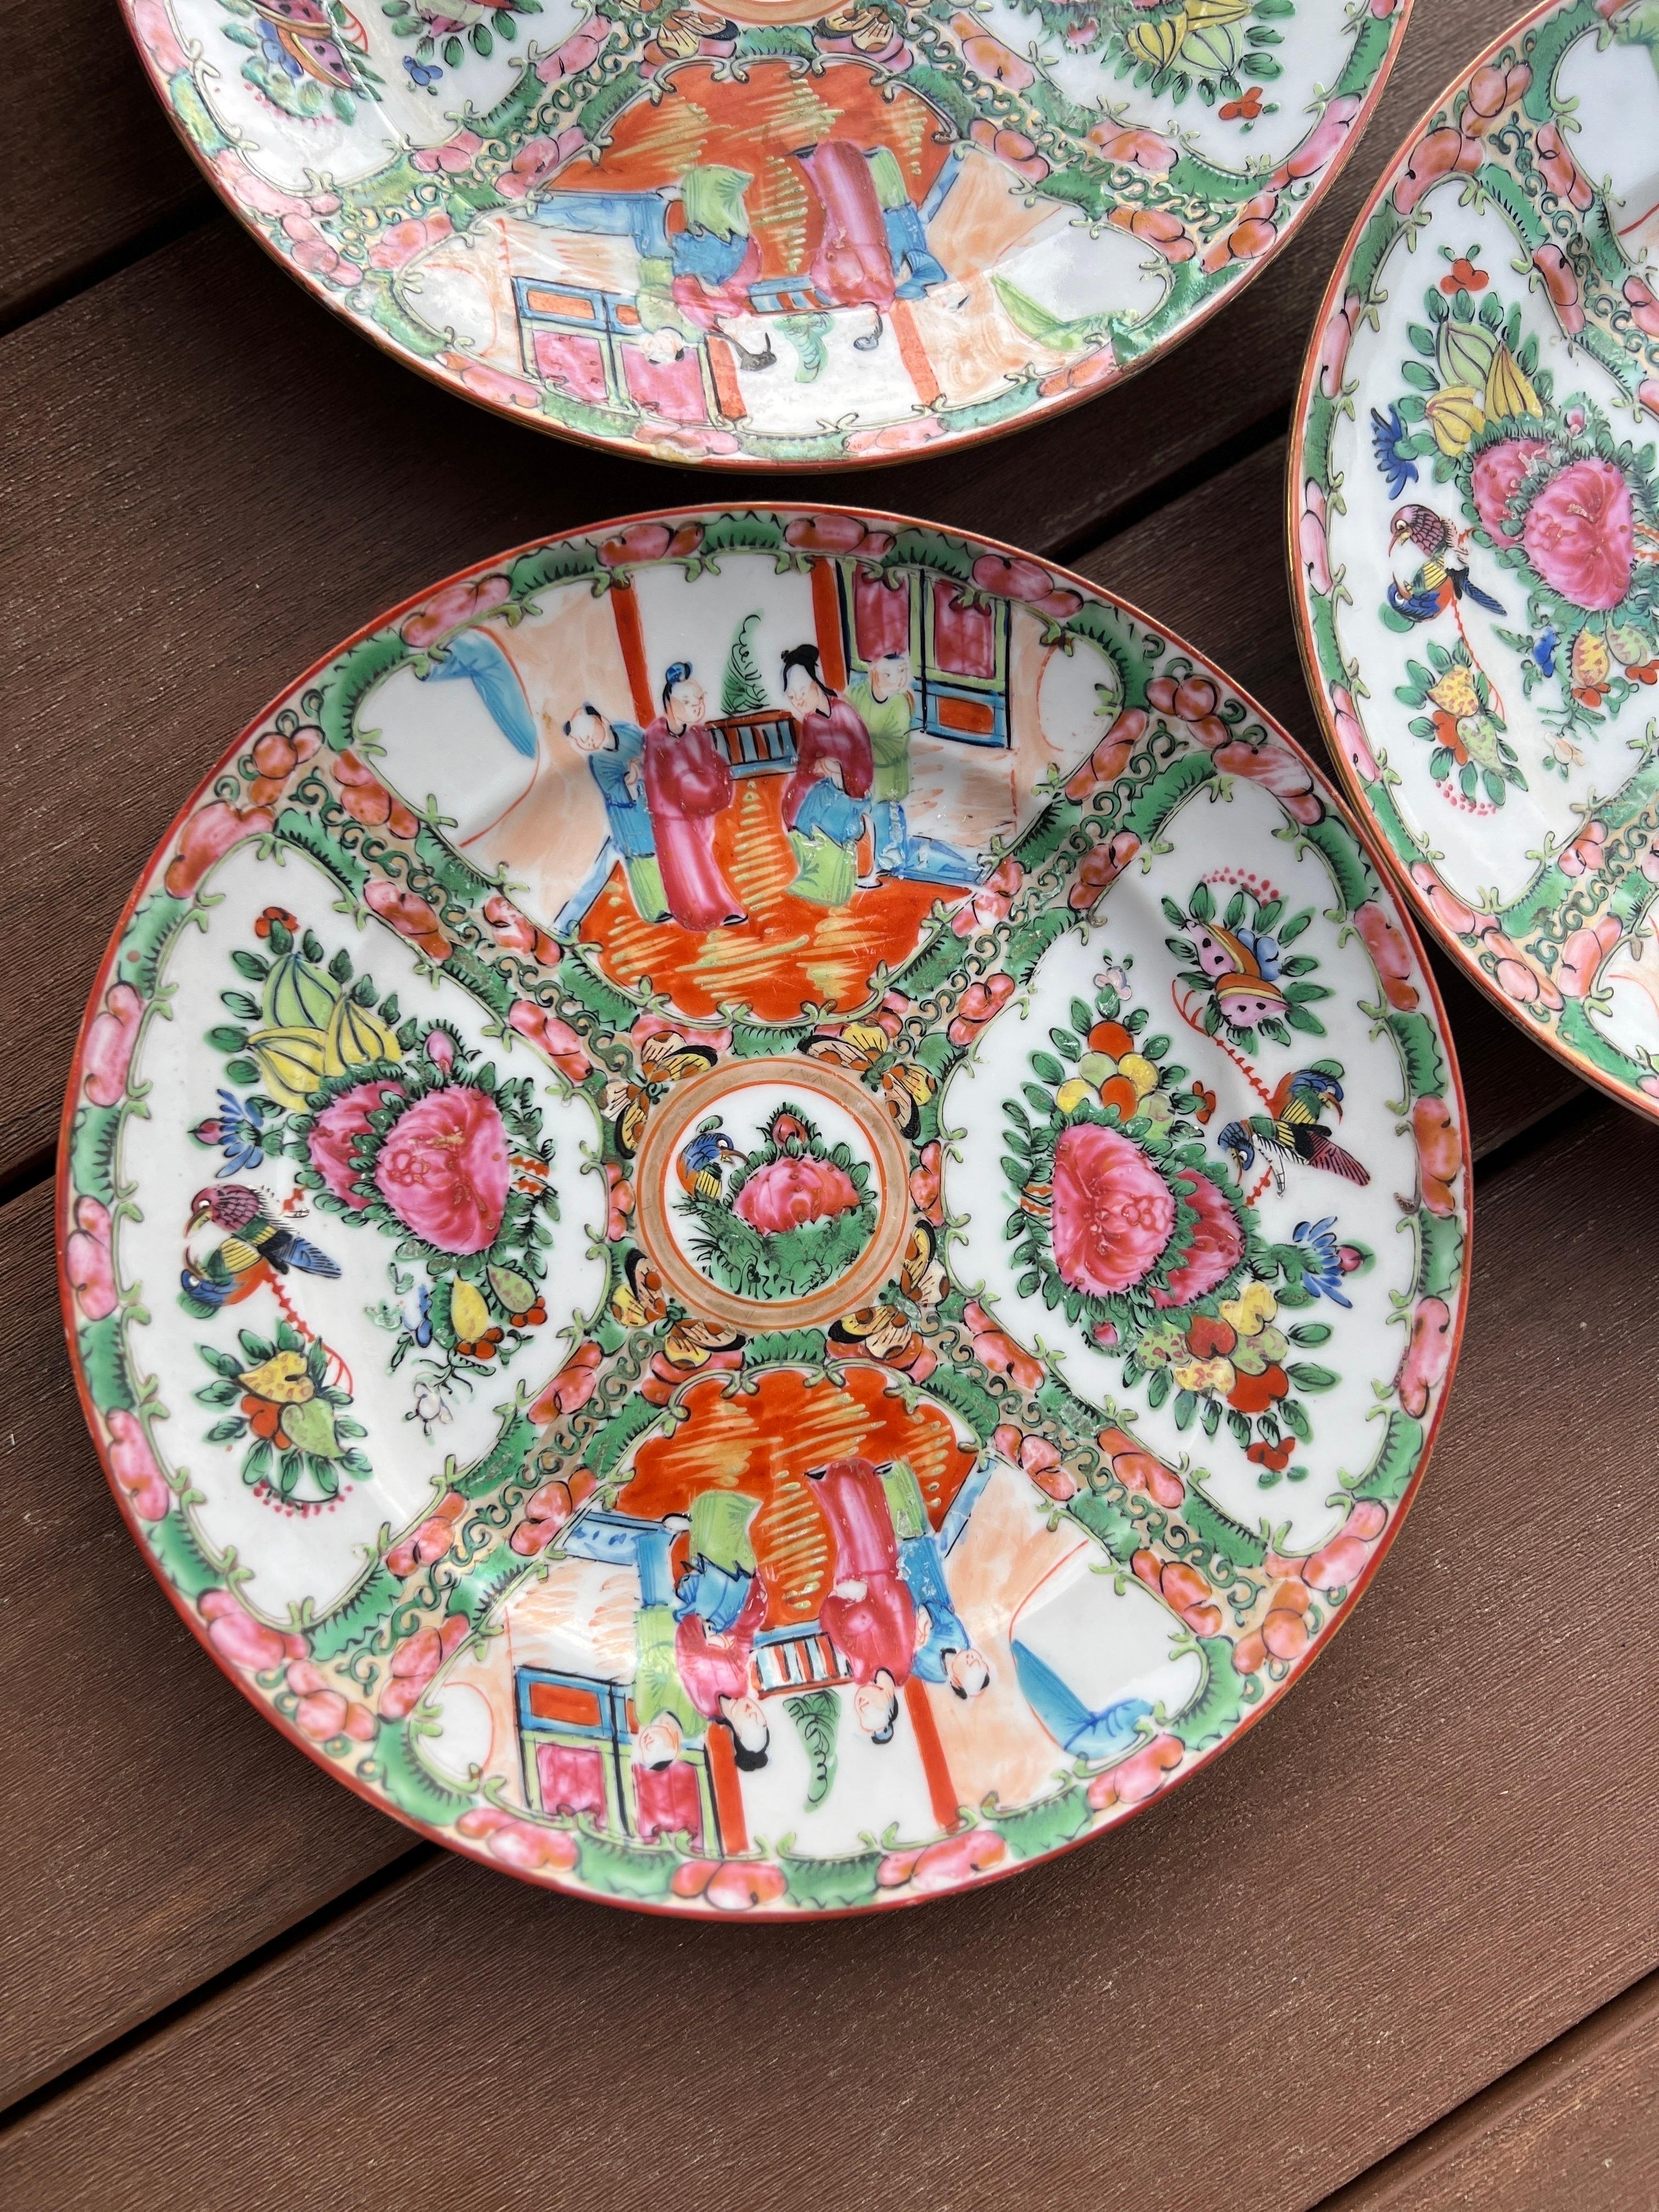 Sold as a set of 5 plates. Enamel decorated with figural windows and gilt decoration to center.